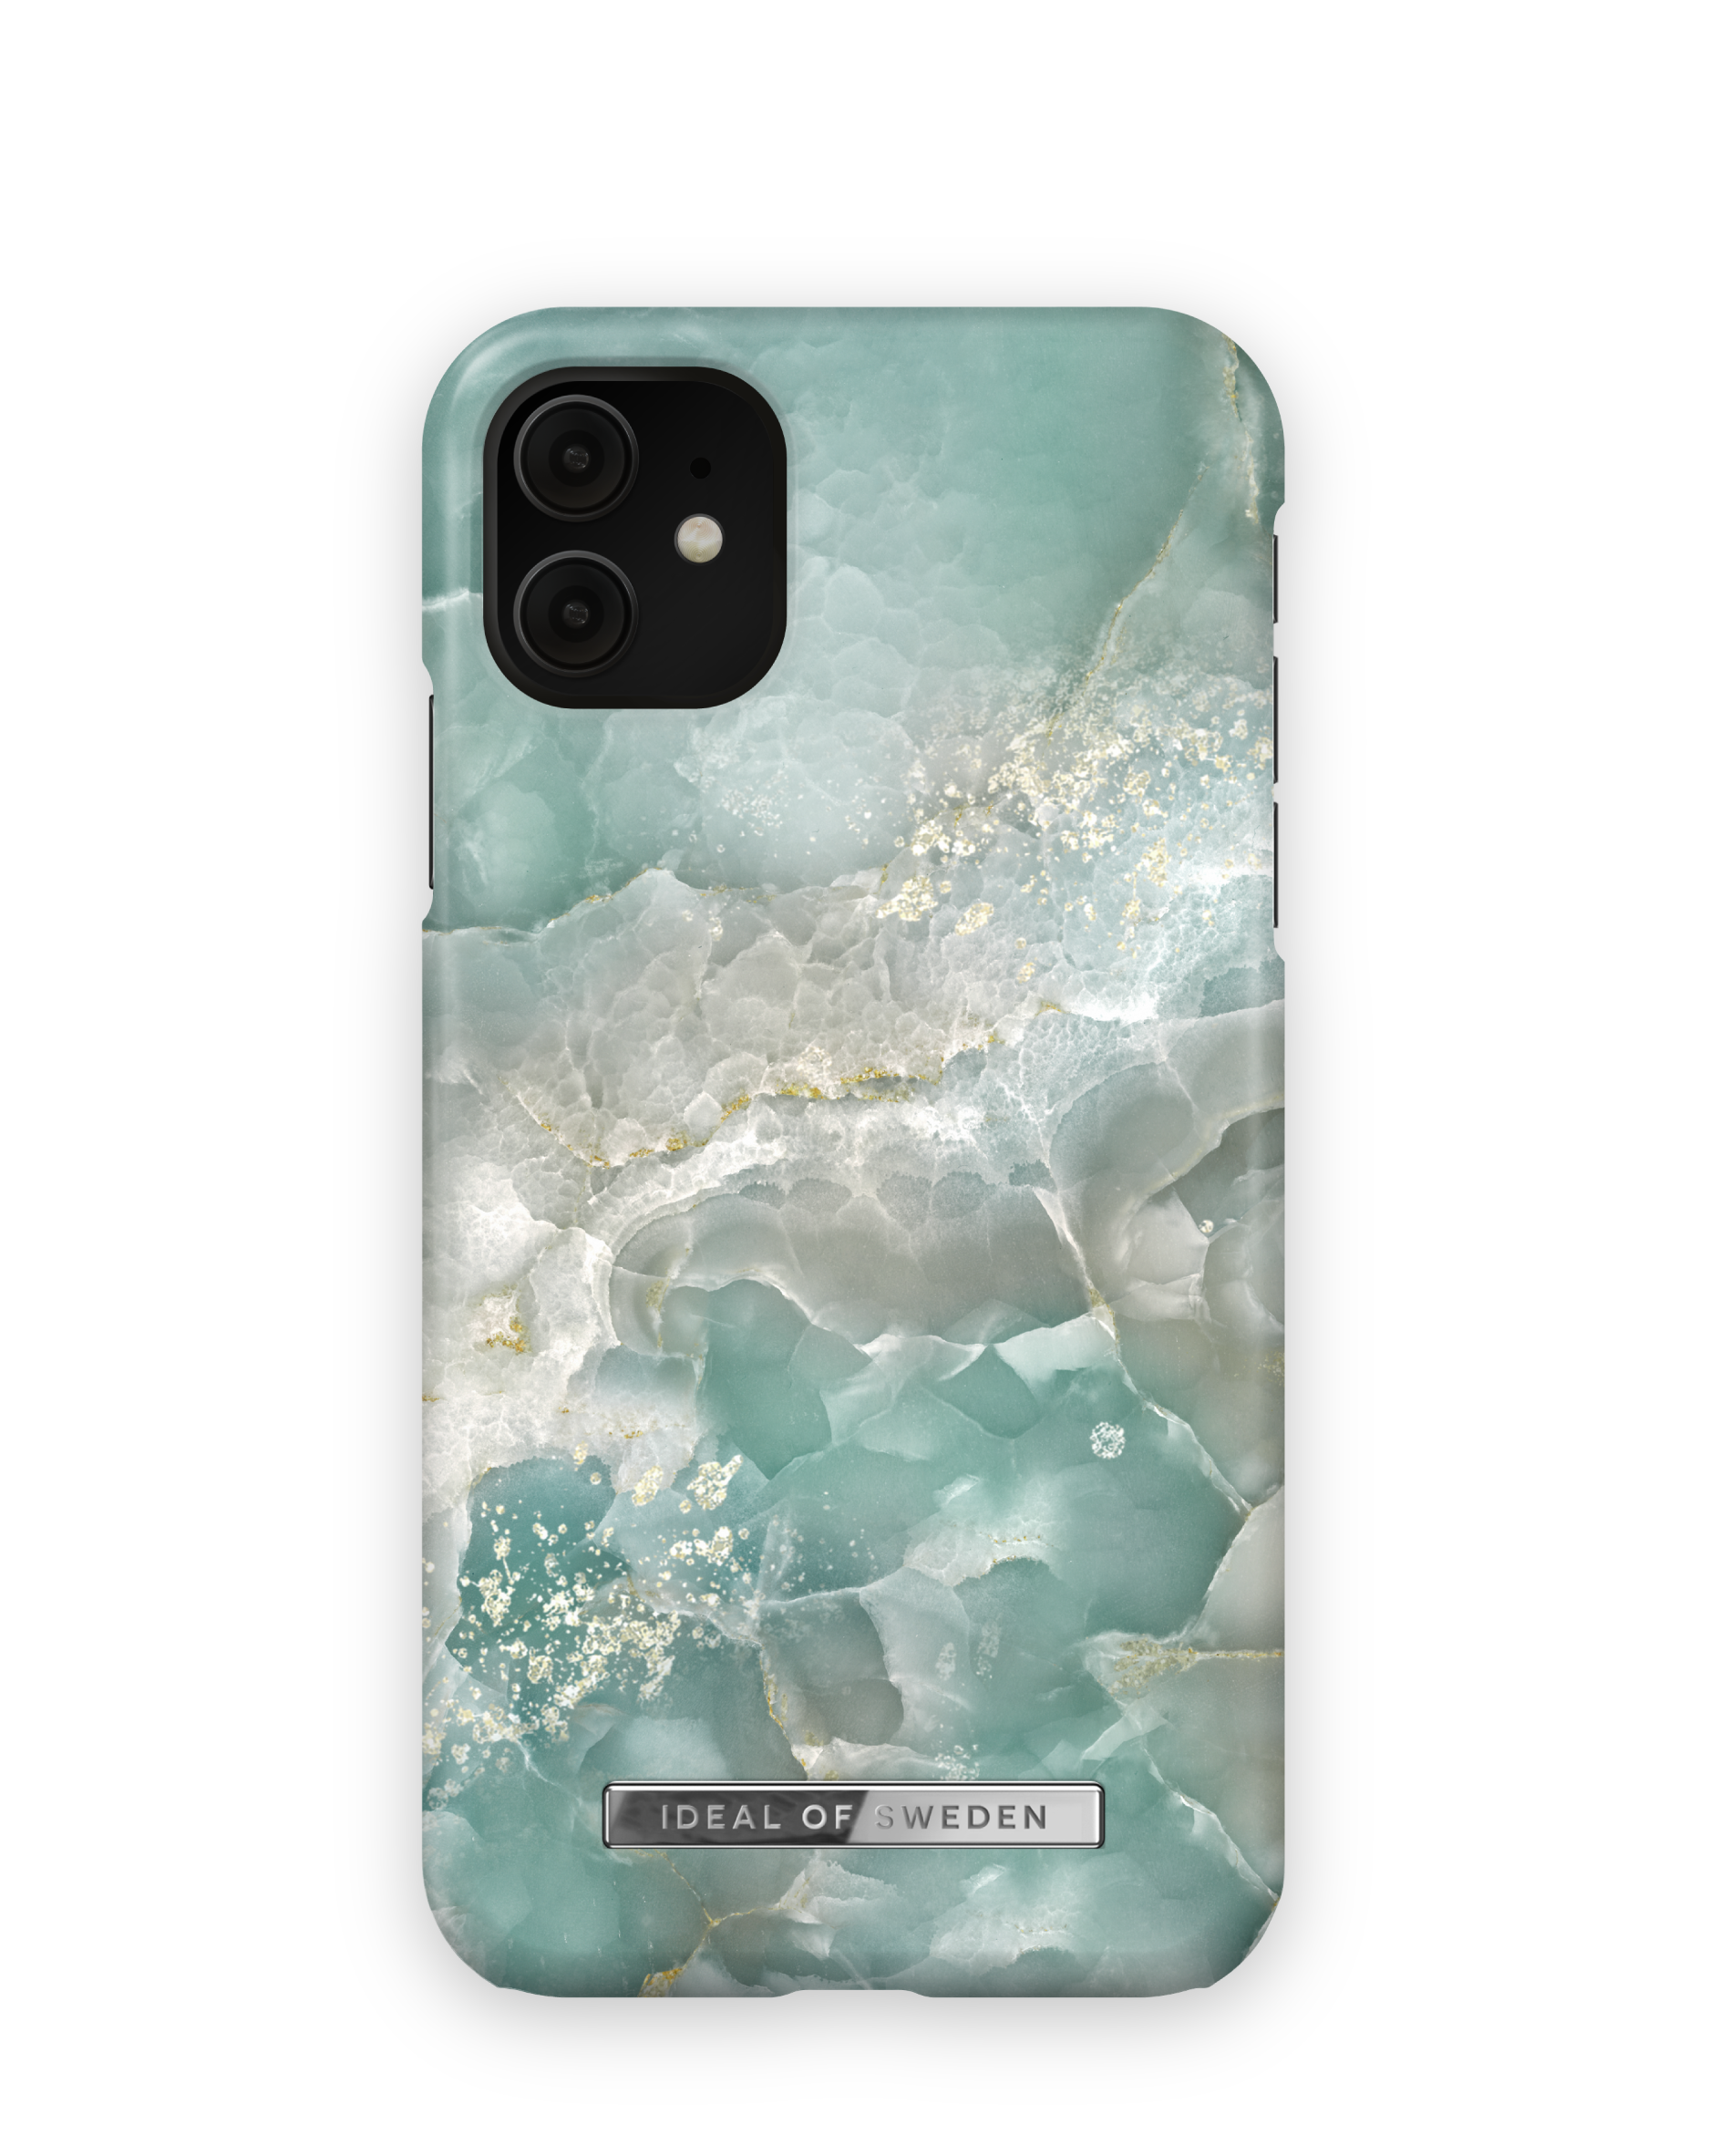 iPhone Marble Backcover, Apple, iPhone / 11 IDEAL XR, SWEDEN OF IDFCSS22-I1961-391, Azura